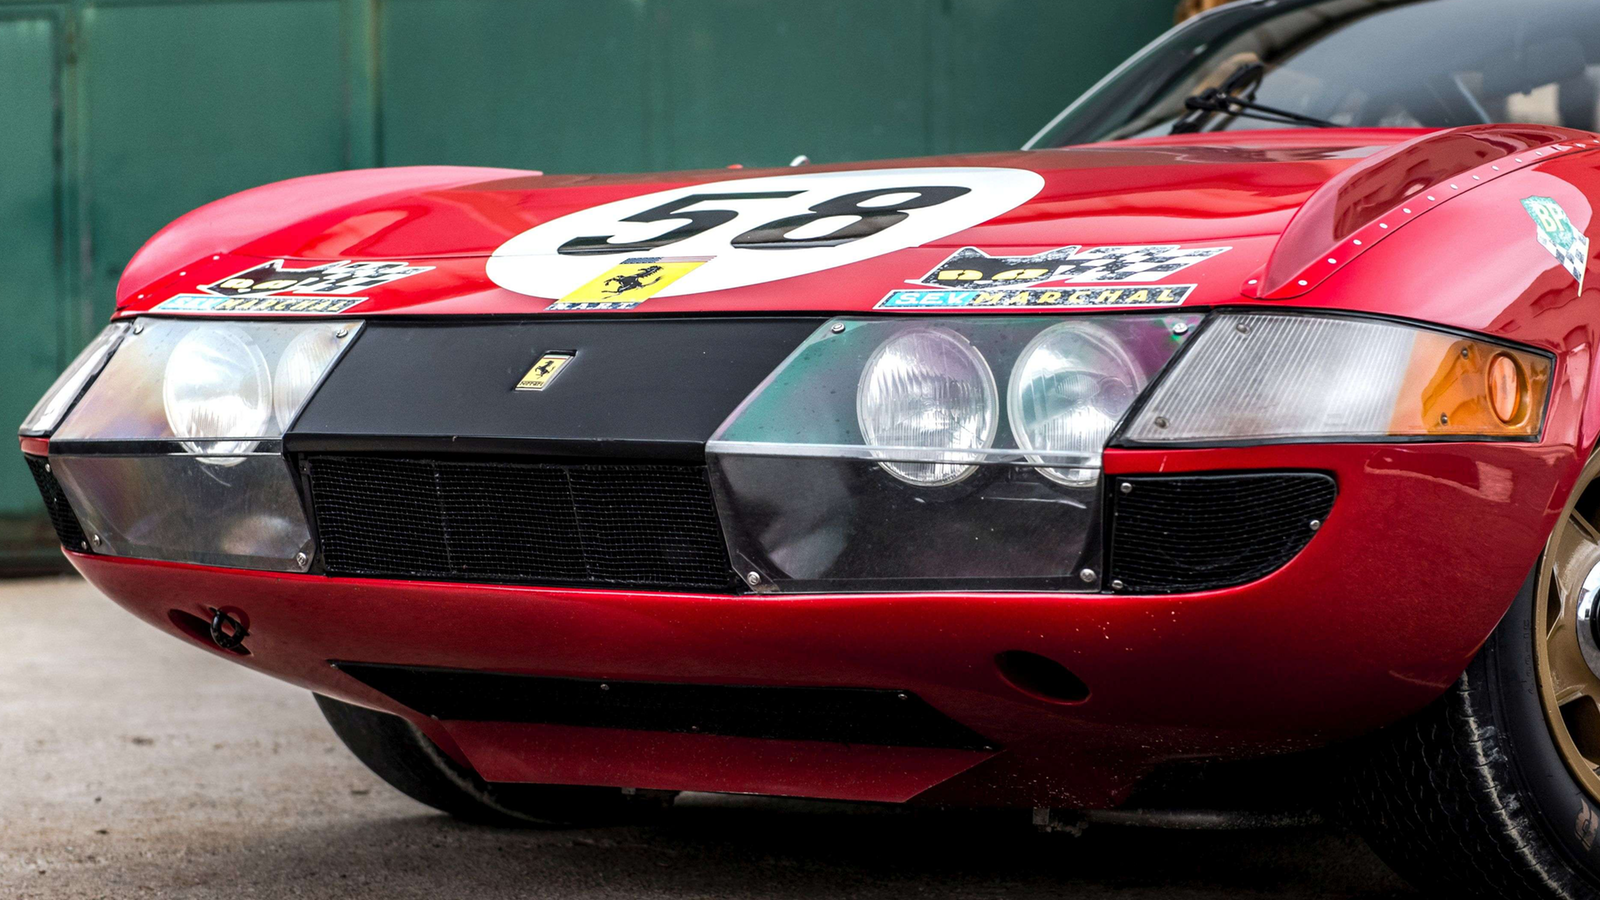 This Ferrari Daytona was driven at Le Mans – and could be yours for €7m